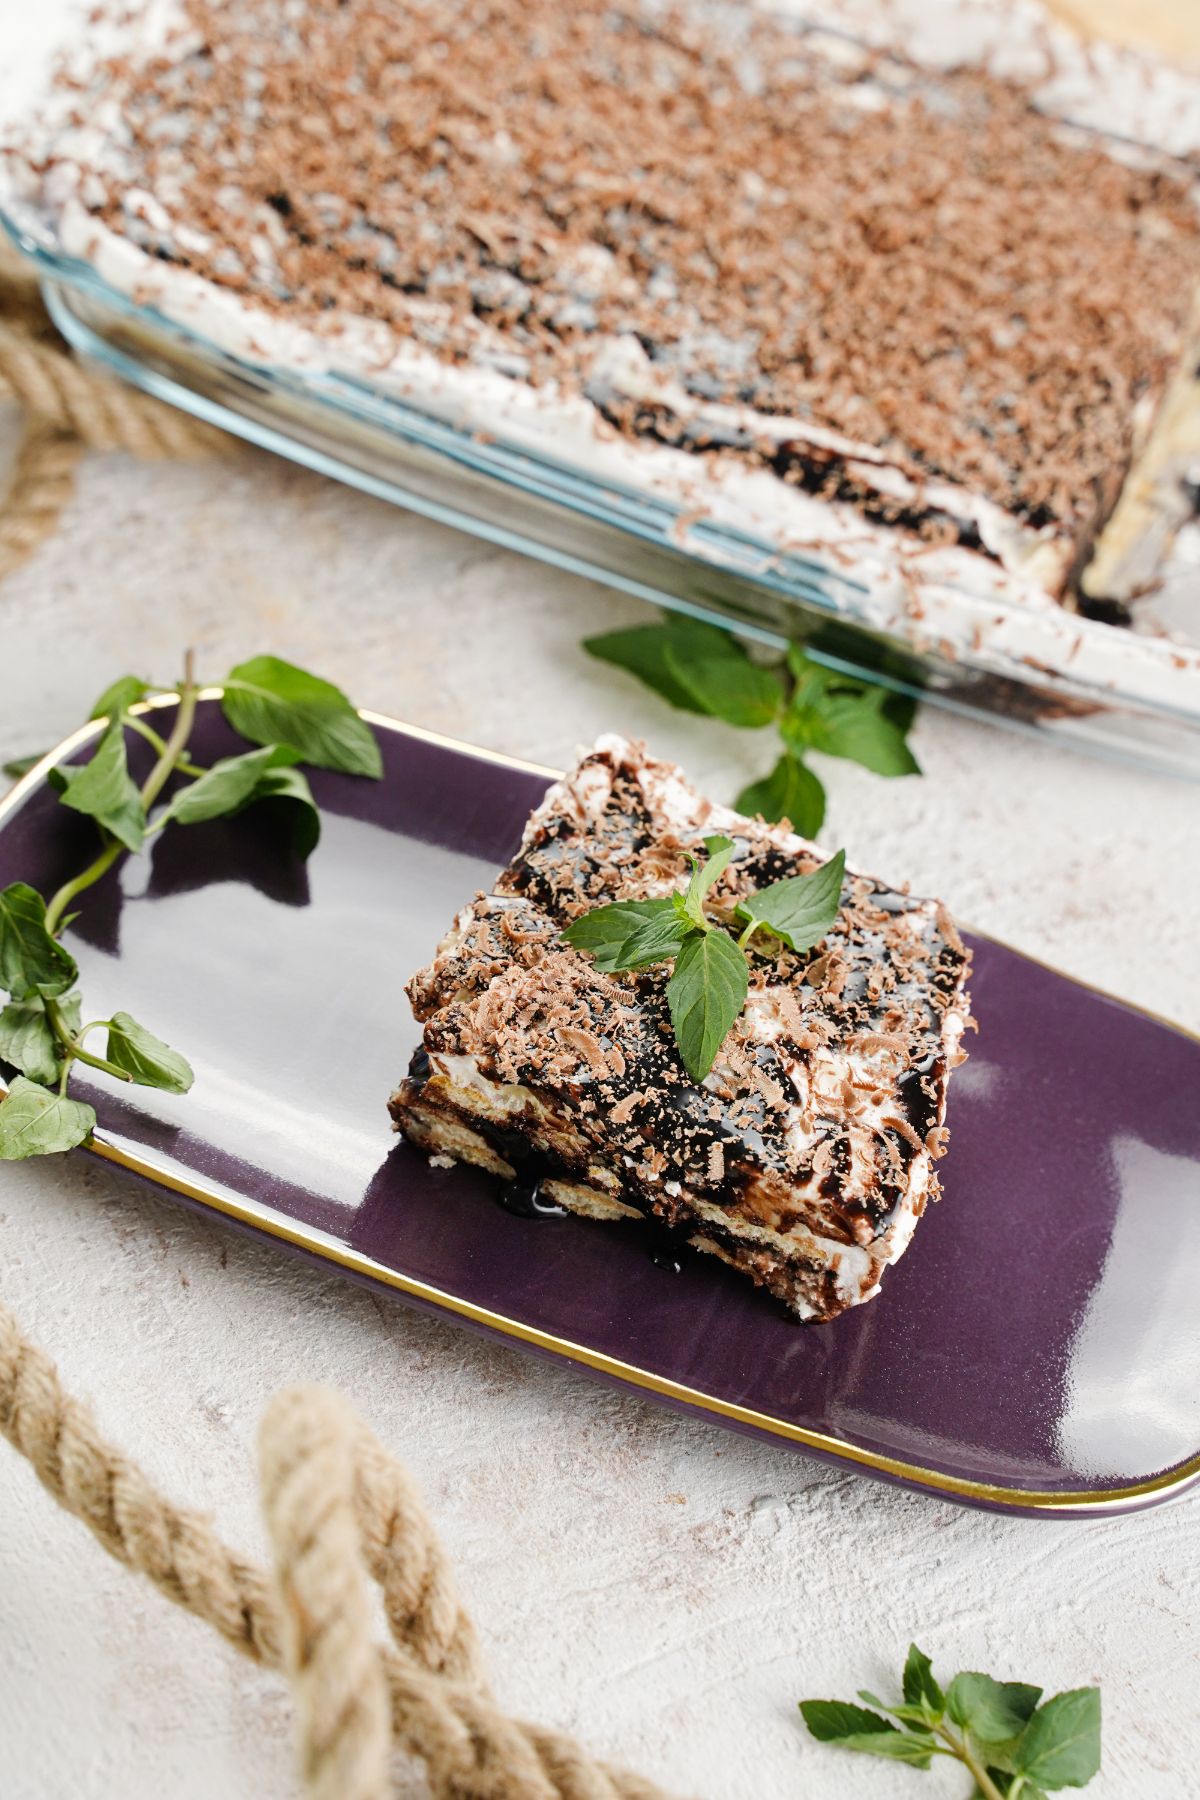 Cookie Dough Lasagna served with mint leaves